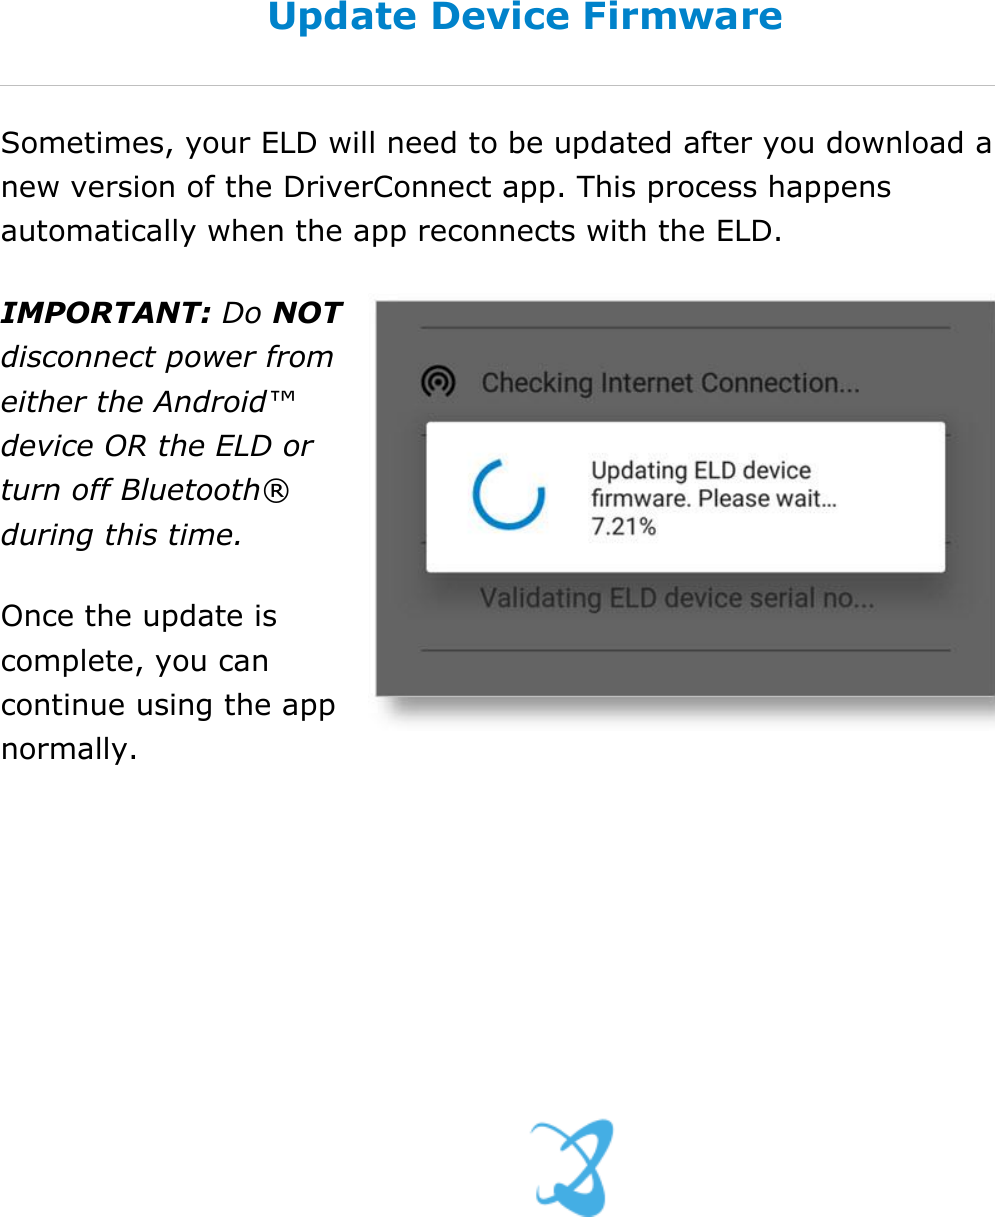 Set My Duty Status DriverConnect User Guide  19 © 2016-2017, Rand McNally, Inc. Update Device Firmware Sometimes, your ELD will need to be updated after you download a new version of the DriverConnect app. This process happens automatically when the app reconnects with the ELD. IMPORTANT: Do NOT disconnect power from either the Android™ device OR the ELD or turn off Bluetooth® during this time. Once the update is complete, you can continue using the app normally.    